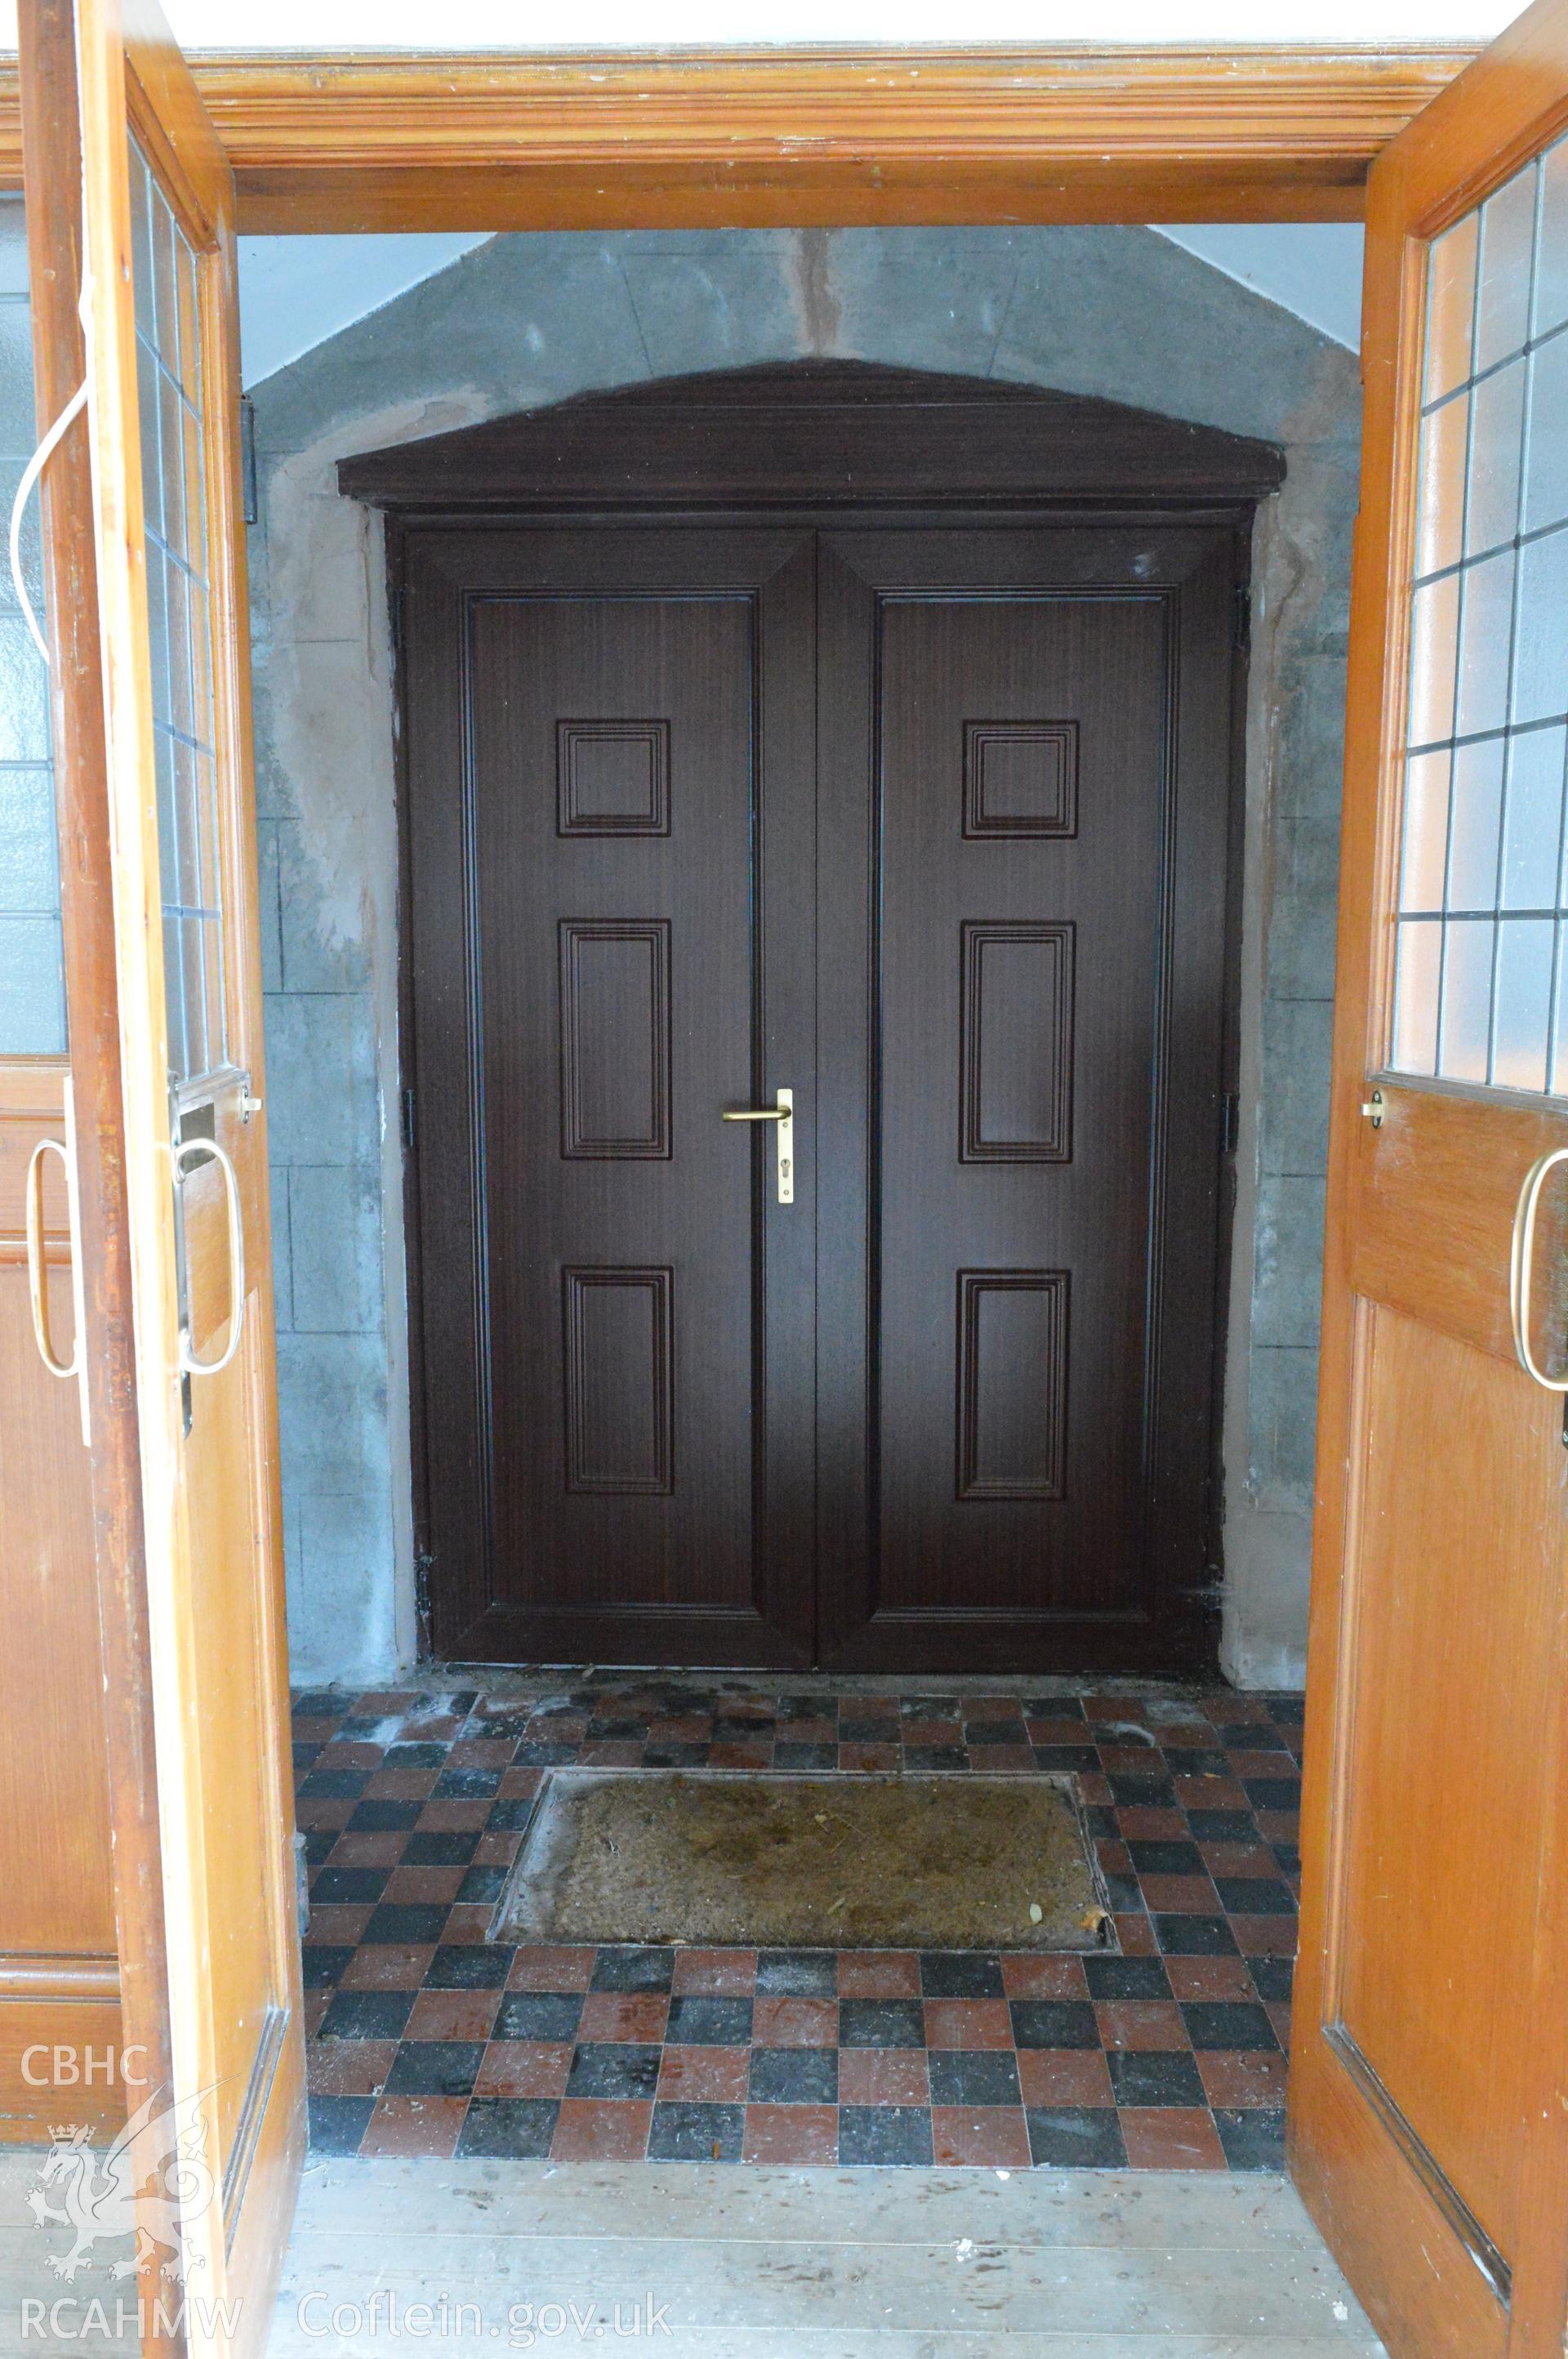 Internal view from the east of main entrance into the church. Digital colour photograph taken during CPAT Project 2396 at the United Reformed Church in Northop. Prepared by Clwyd Powys Archaeological Trust, 2018-2019.